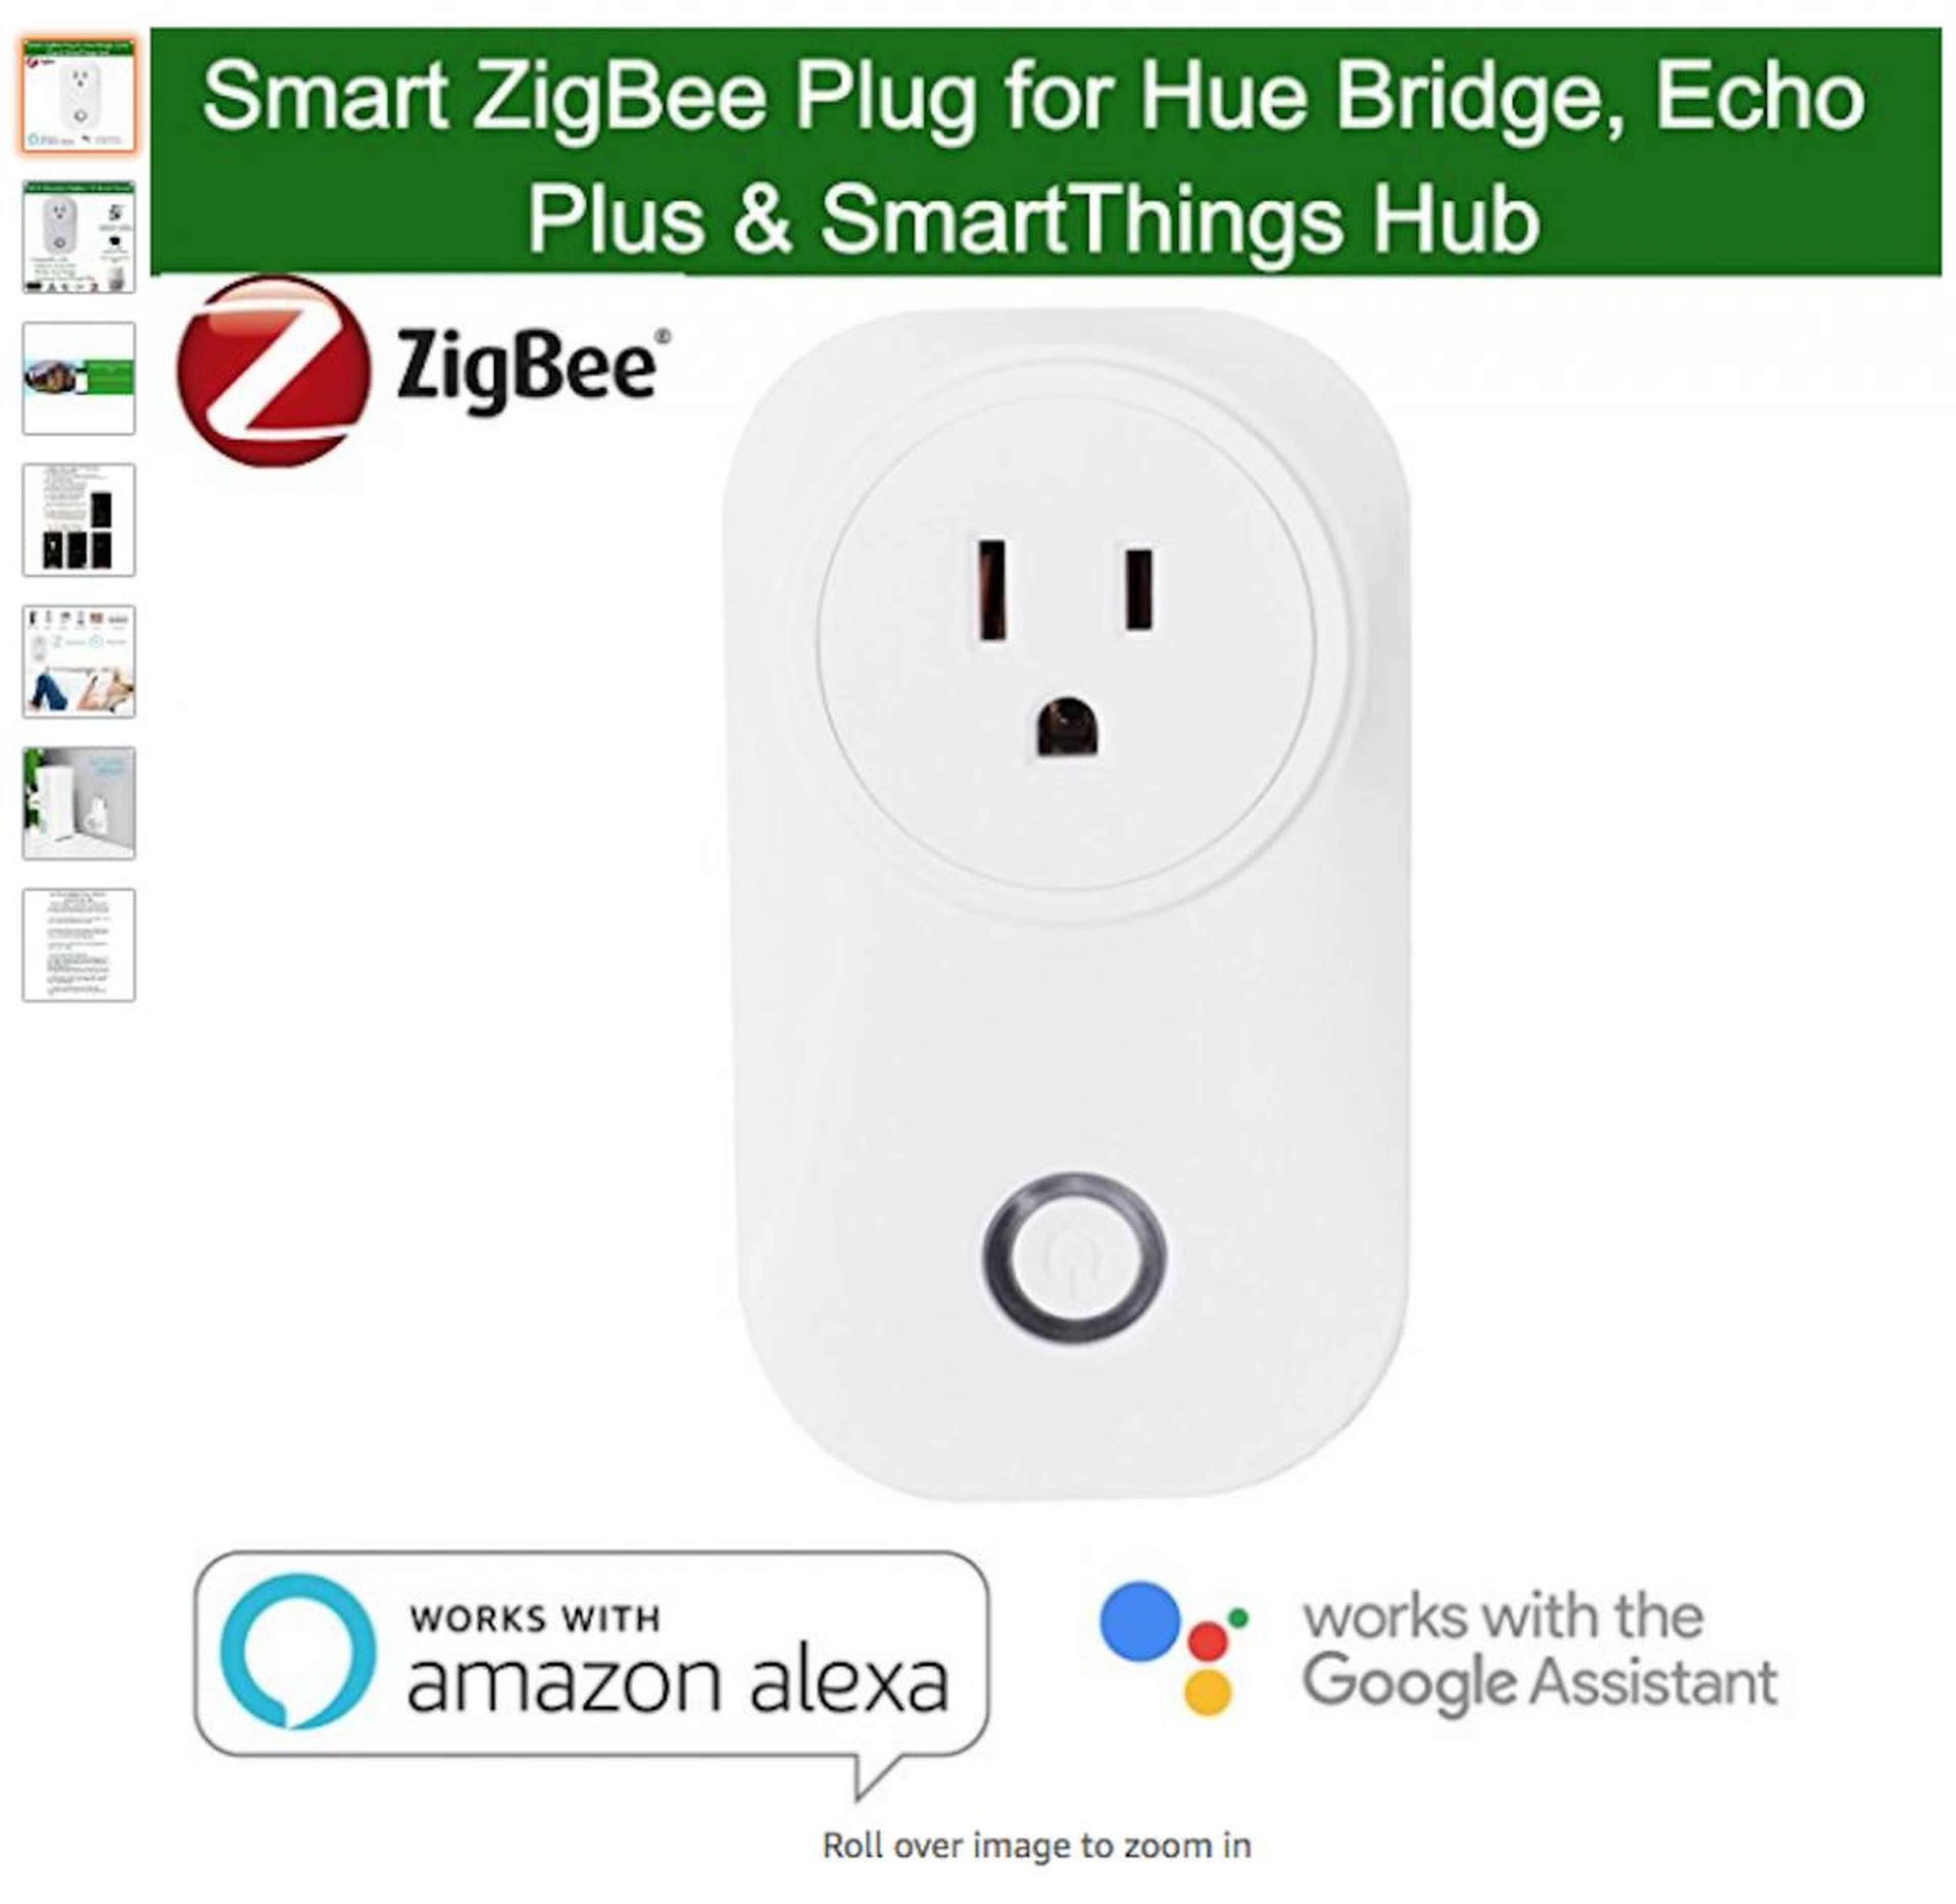 Netherlands: Shoppers in the Netherlands were also buying a lot of tech. Two of the top-selling products were the <a href="https://amzn.to/2uykdmF">Osmart ZigBee Smart Plug</a> and the Philips Hue White Ambiance GU10 LED Spot.